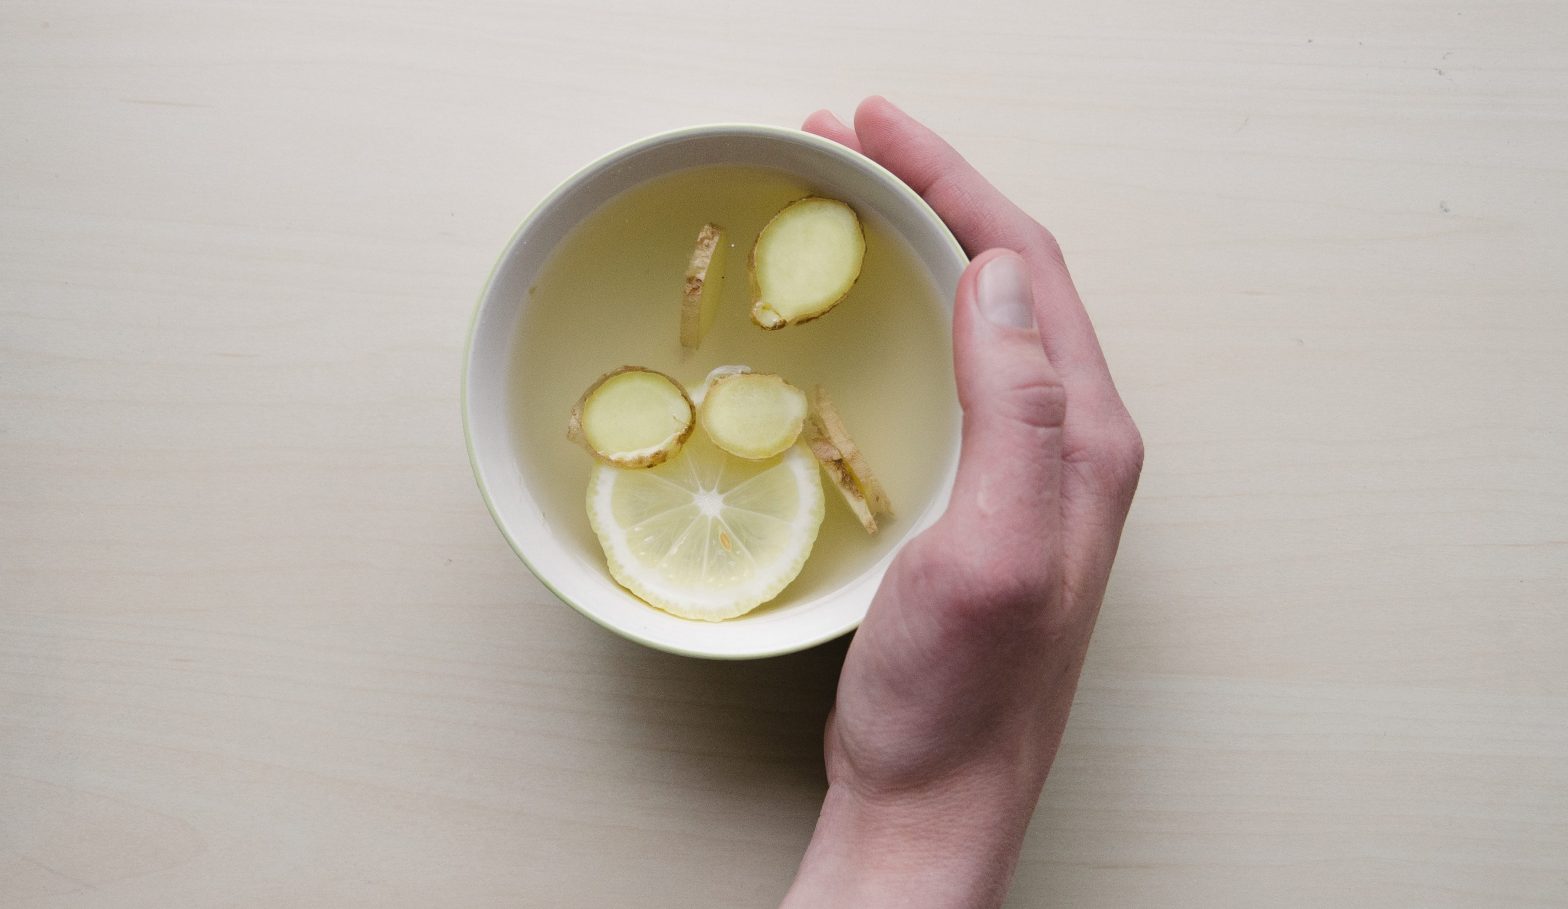 Ginger tea helps fight aches and pains, headaches, fever, nausea